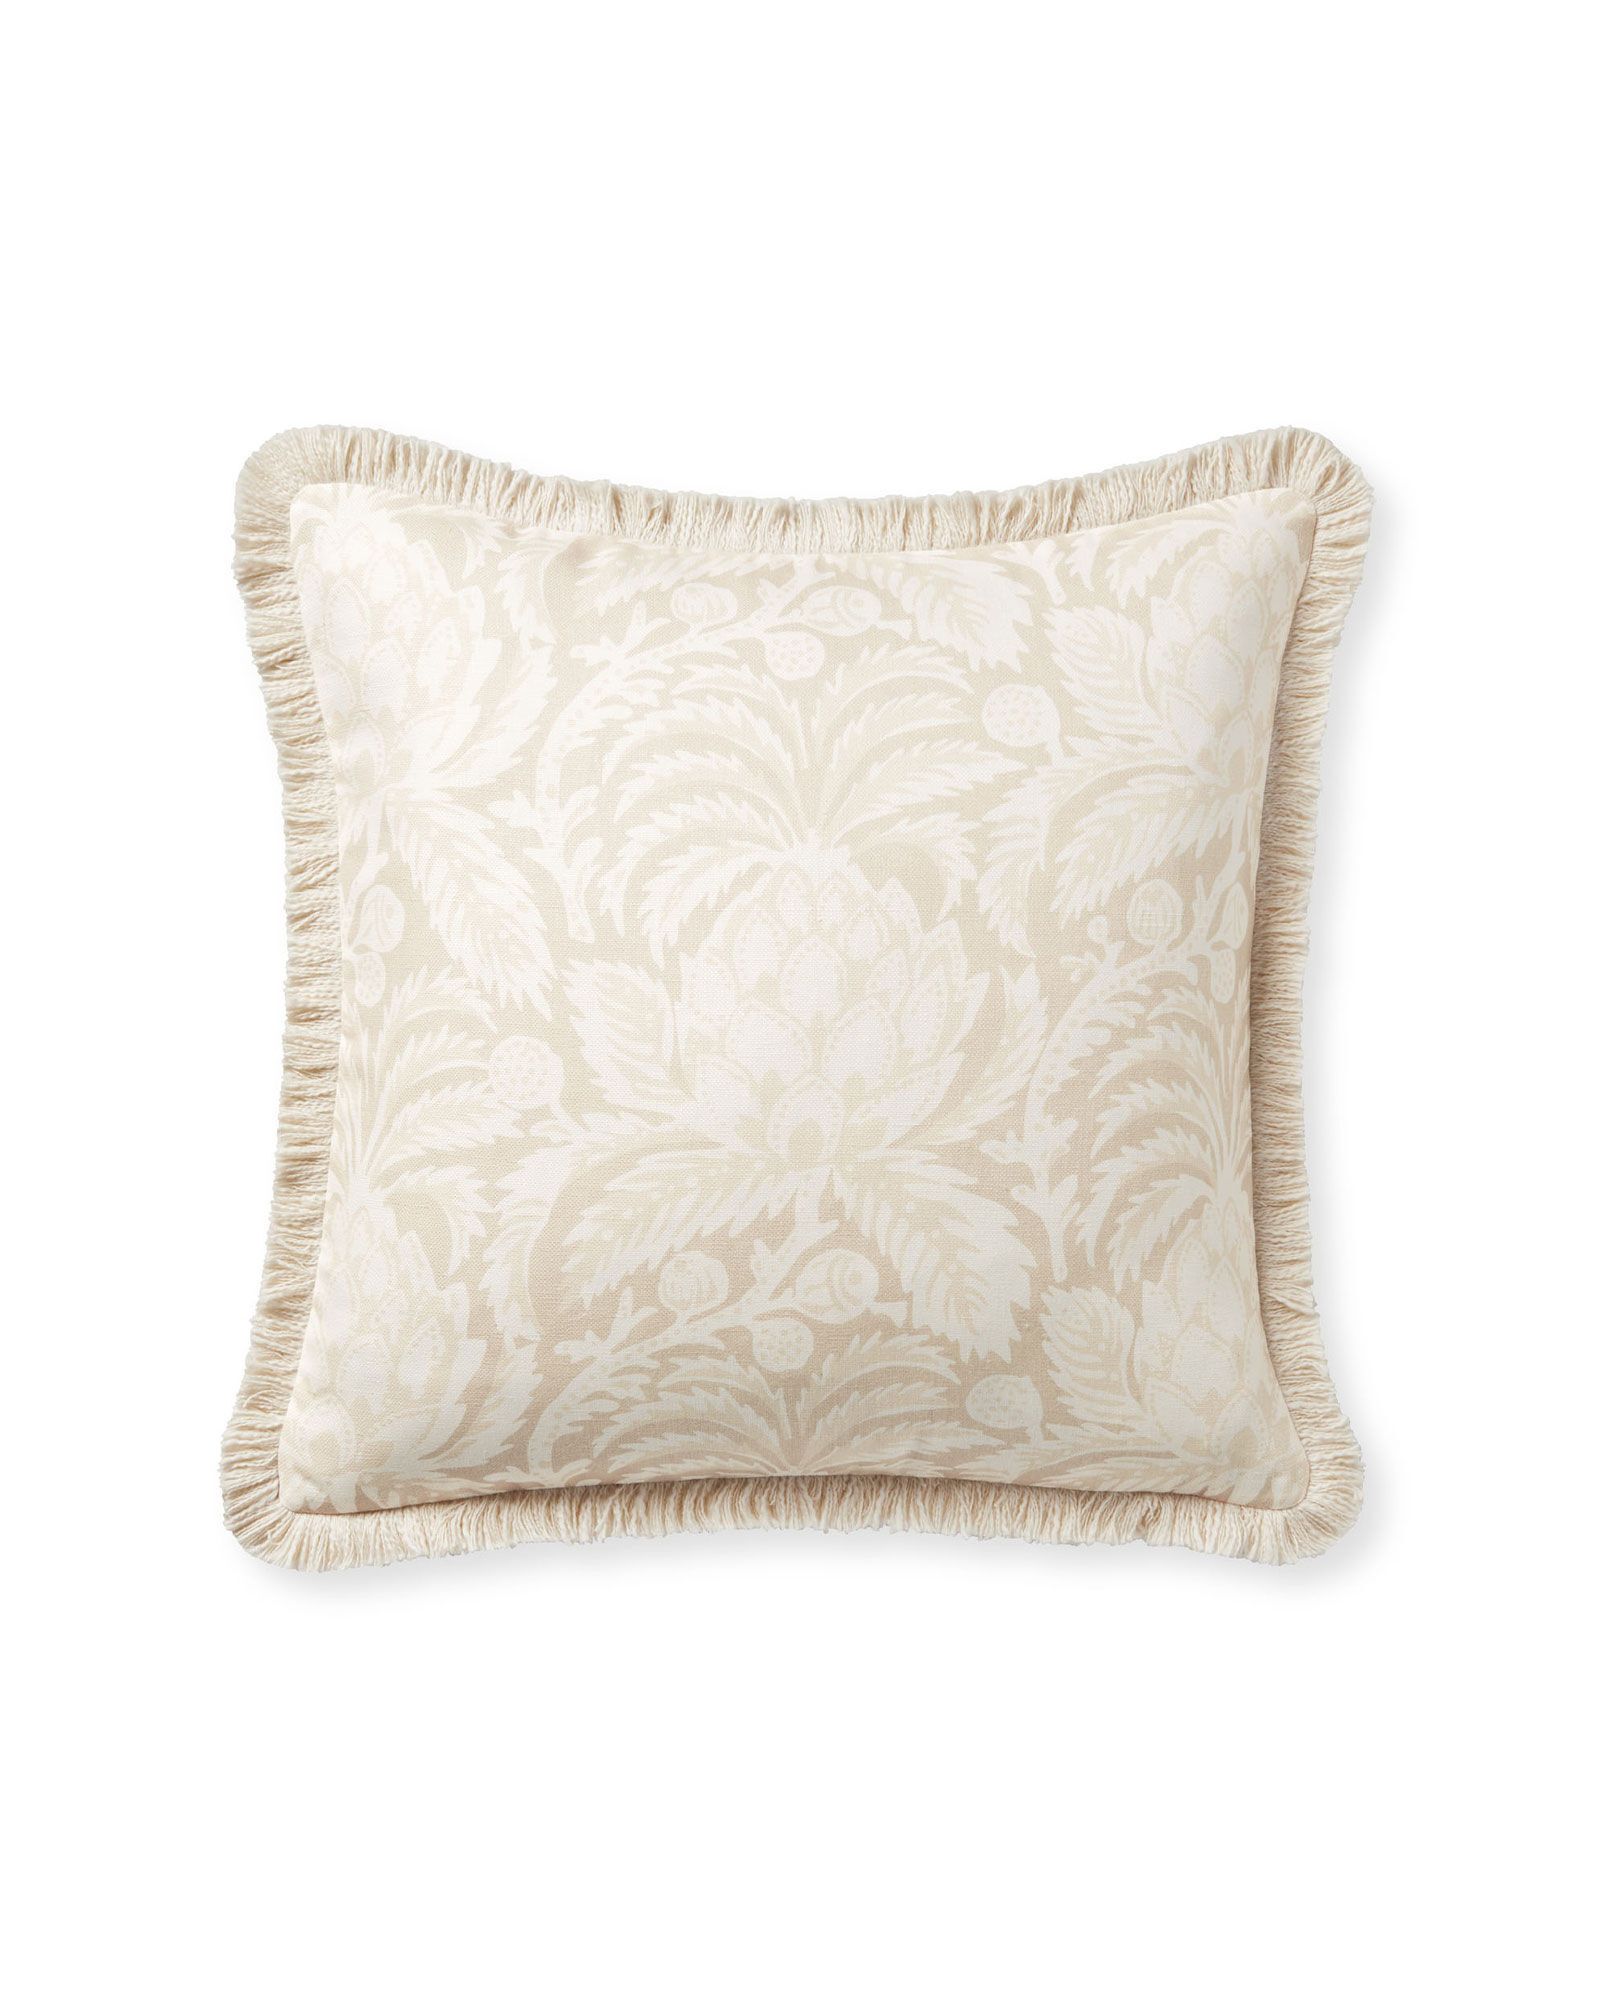 Artichoke Pillow Cover | Serena and Lily